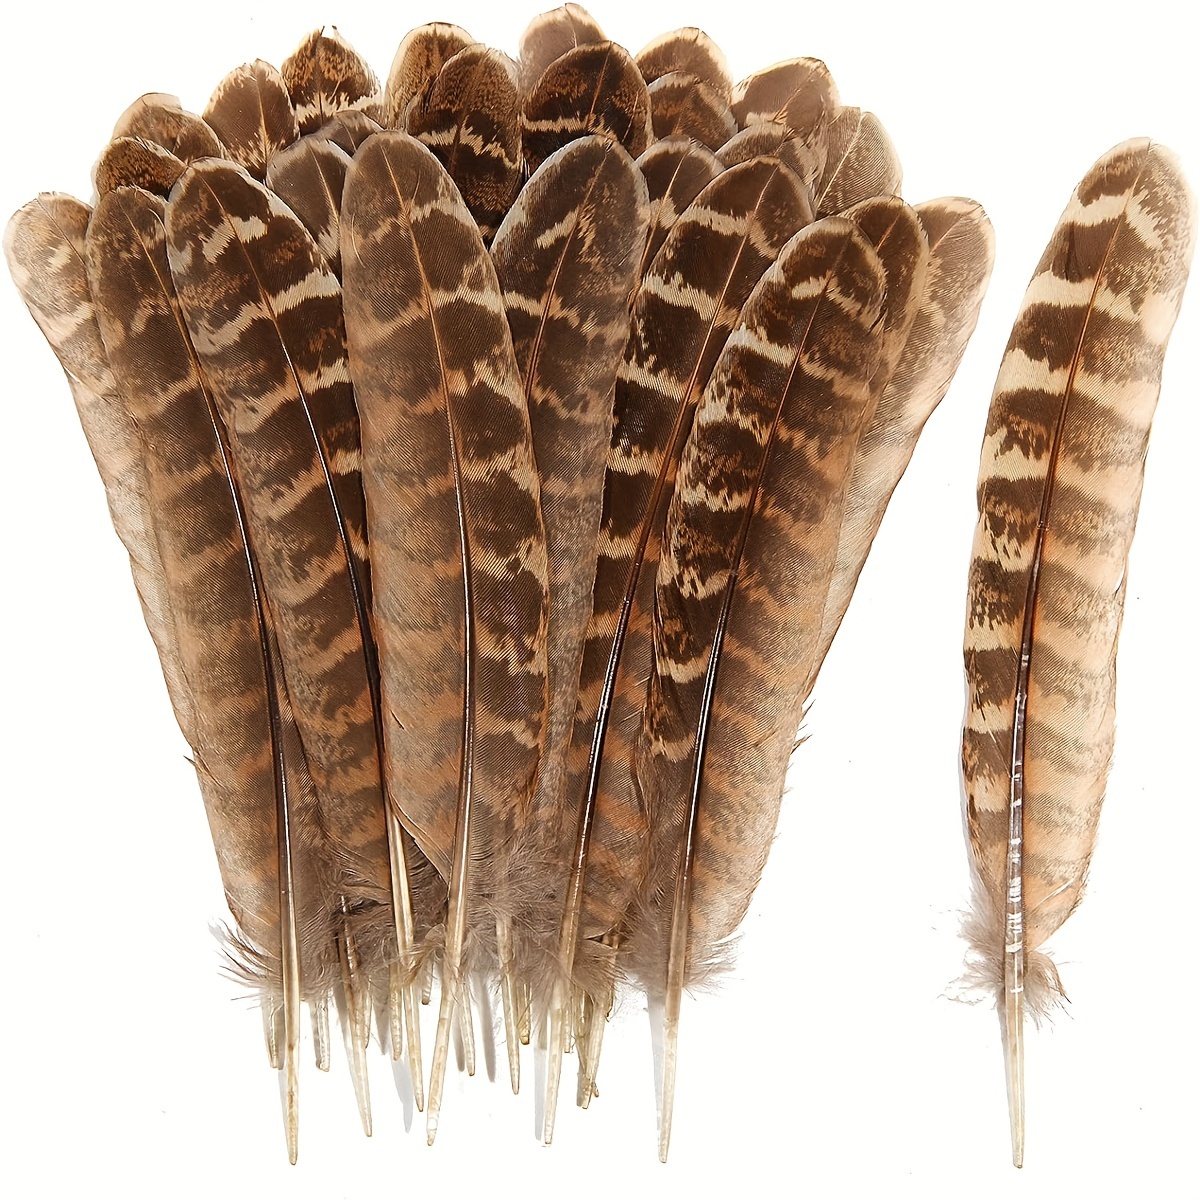  20pcs Female Pheasant Feather Natural Ringneck Tails